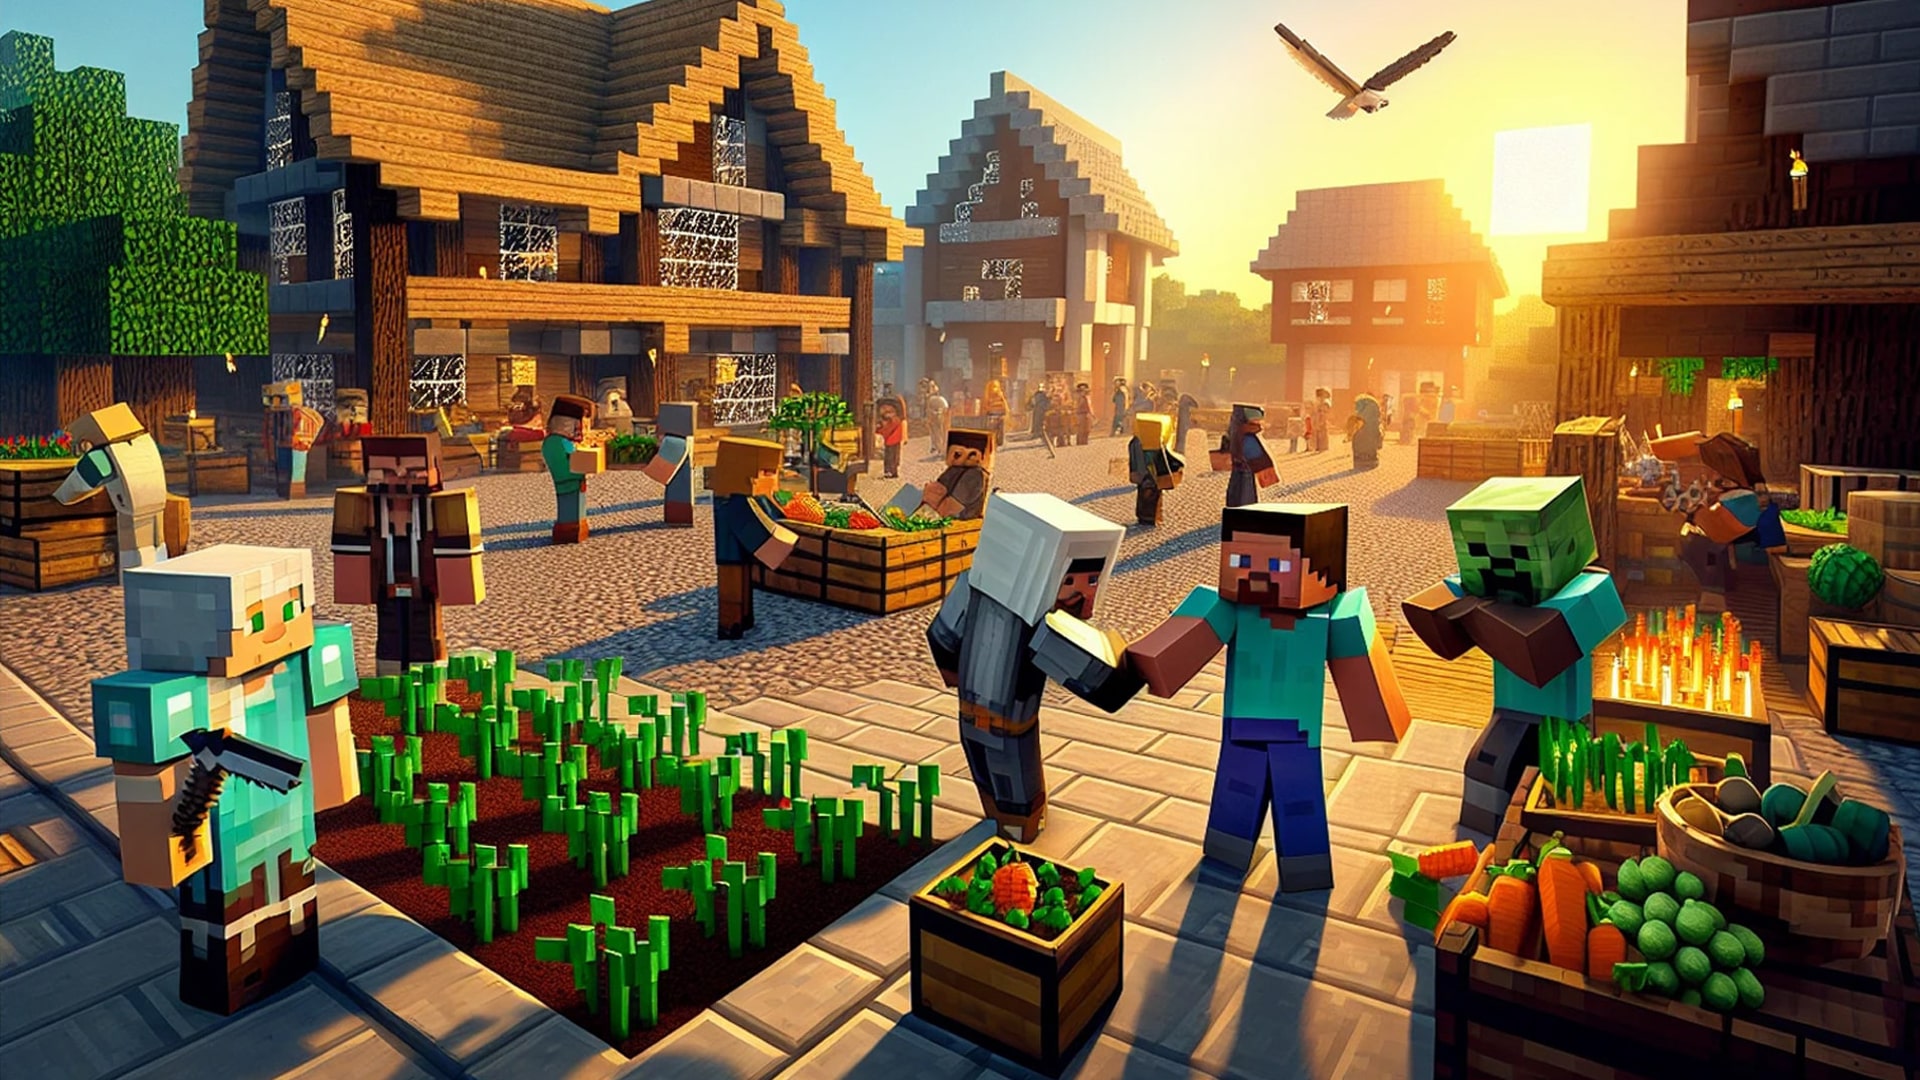 Diverse group of Minecraft characters interacting in a multiplayer setting